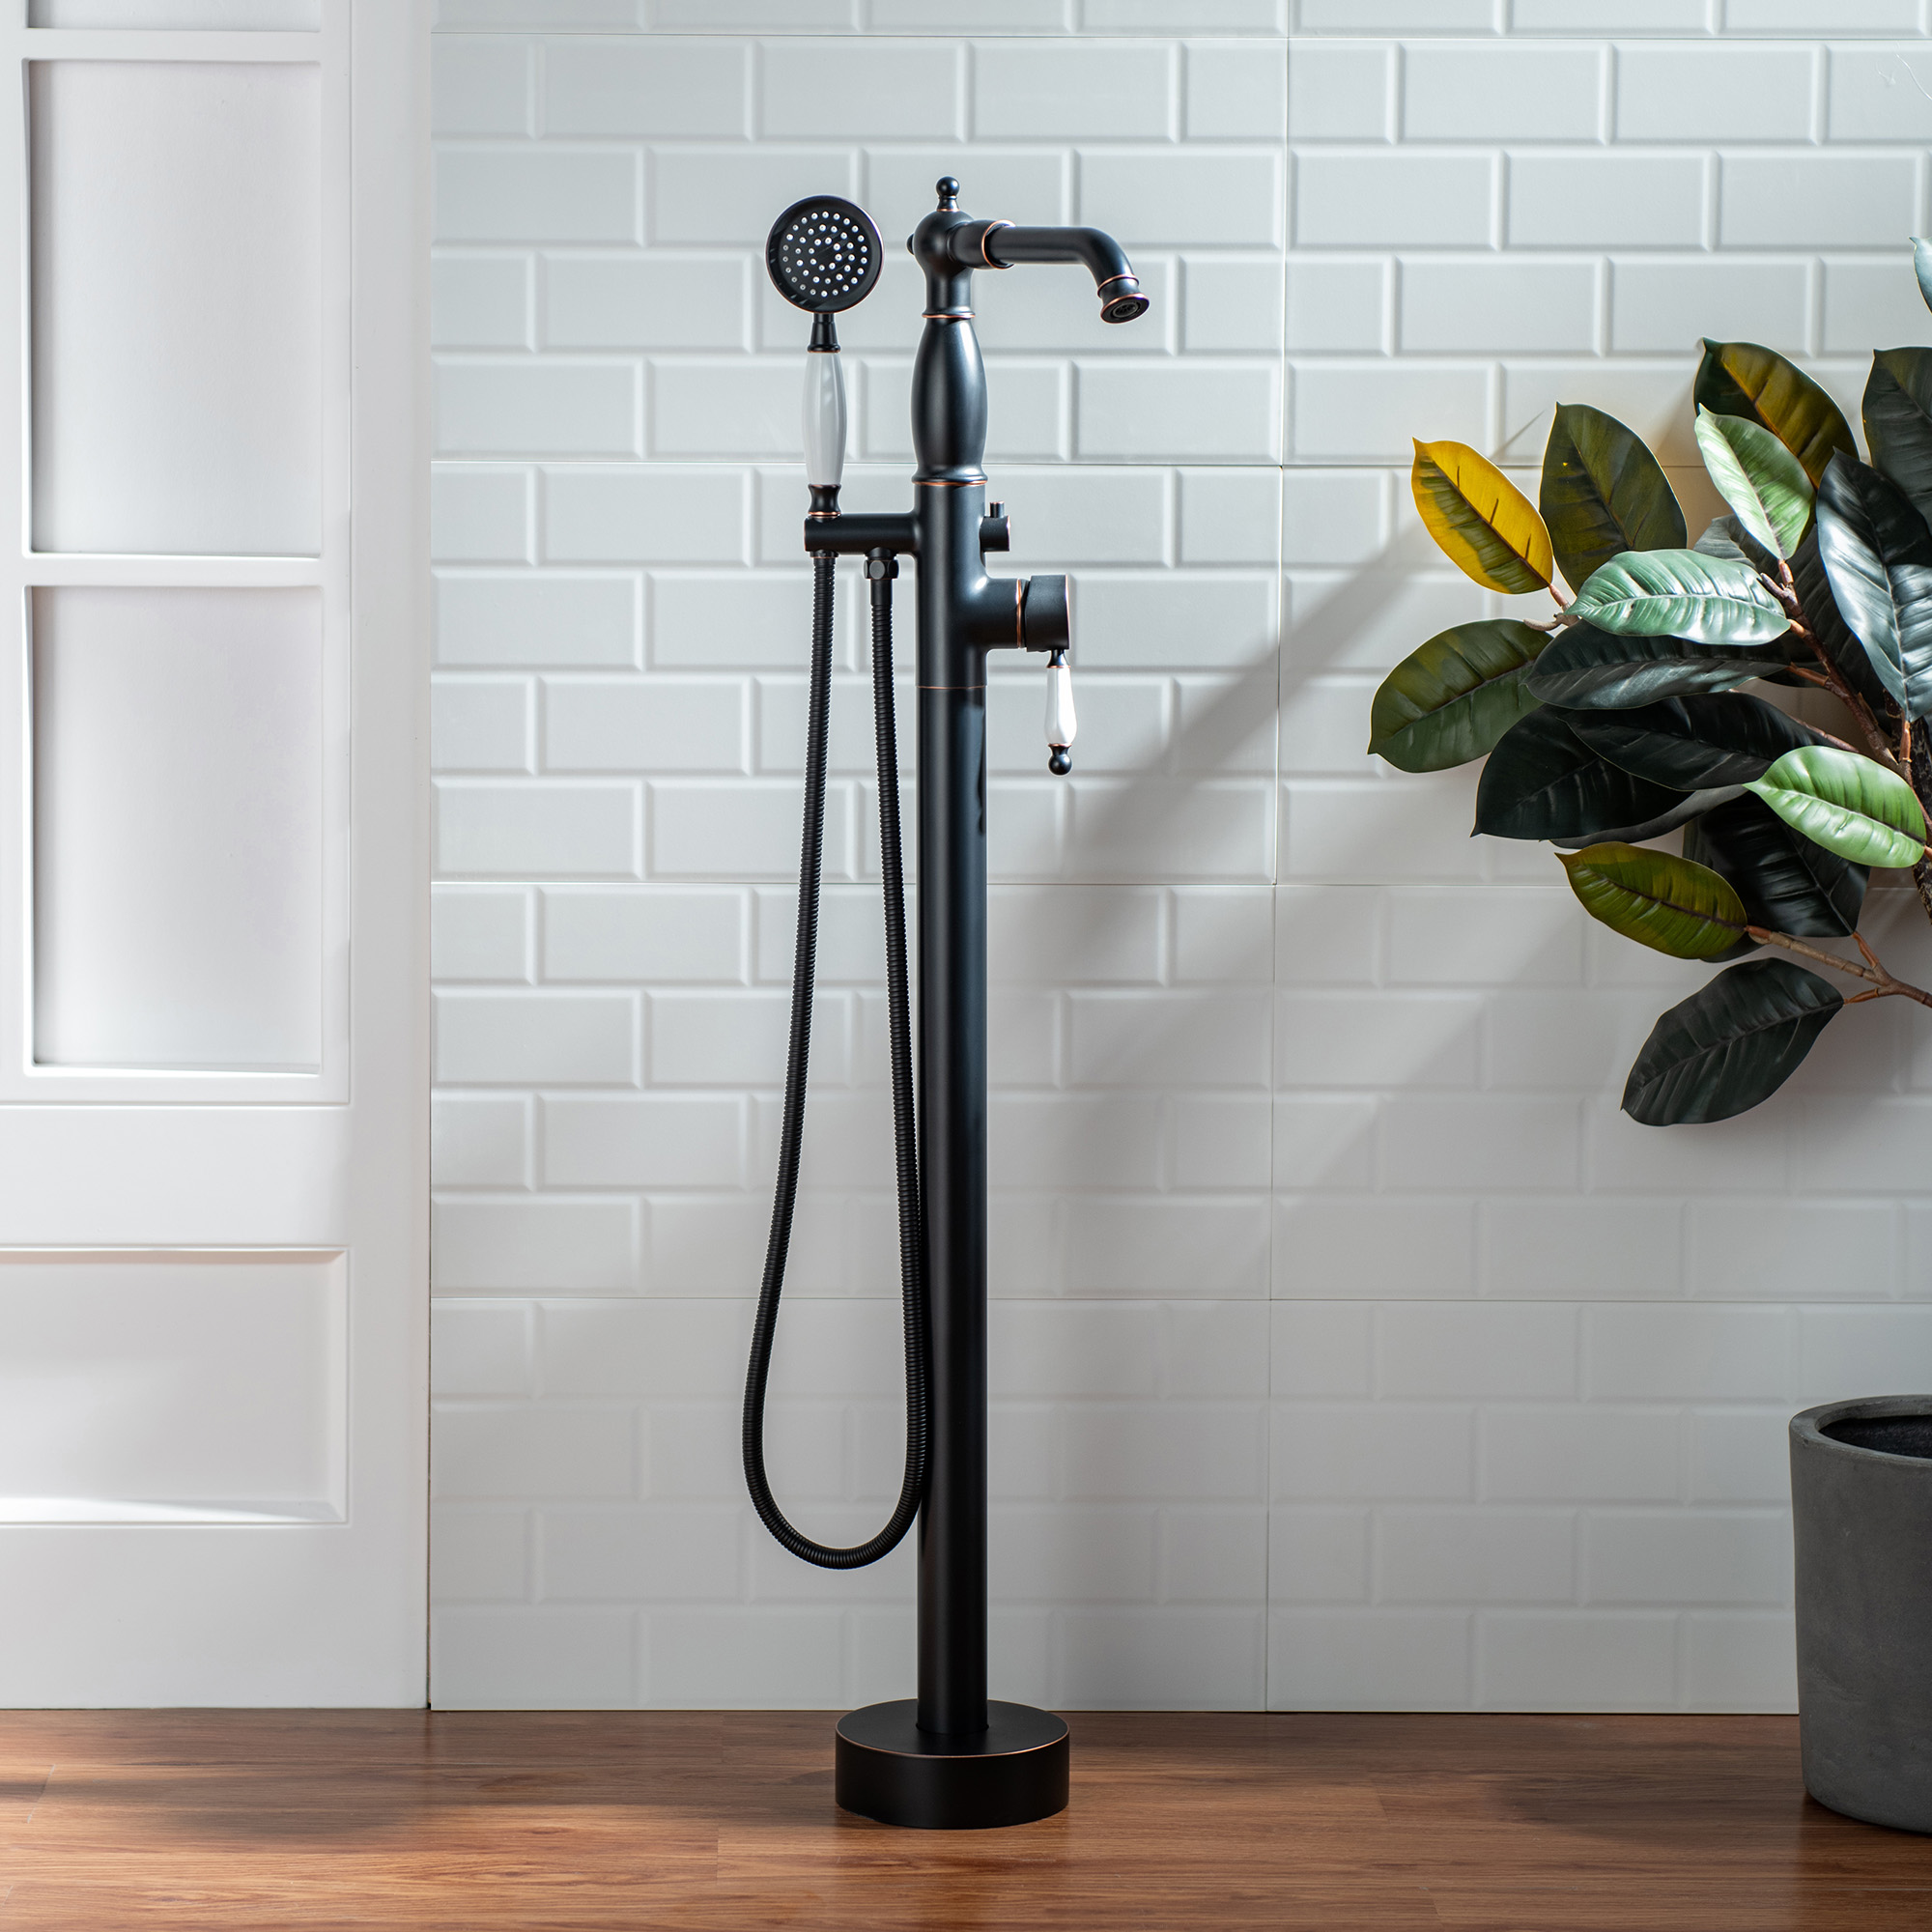  WOODBRIDGE F0049ORB Fusion Single Handle Floor Mount Freestanding Tub Filler Faucet with Telephone Hand shower in Oil Rubbed Bronze Finish_12273